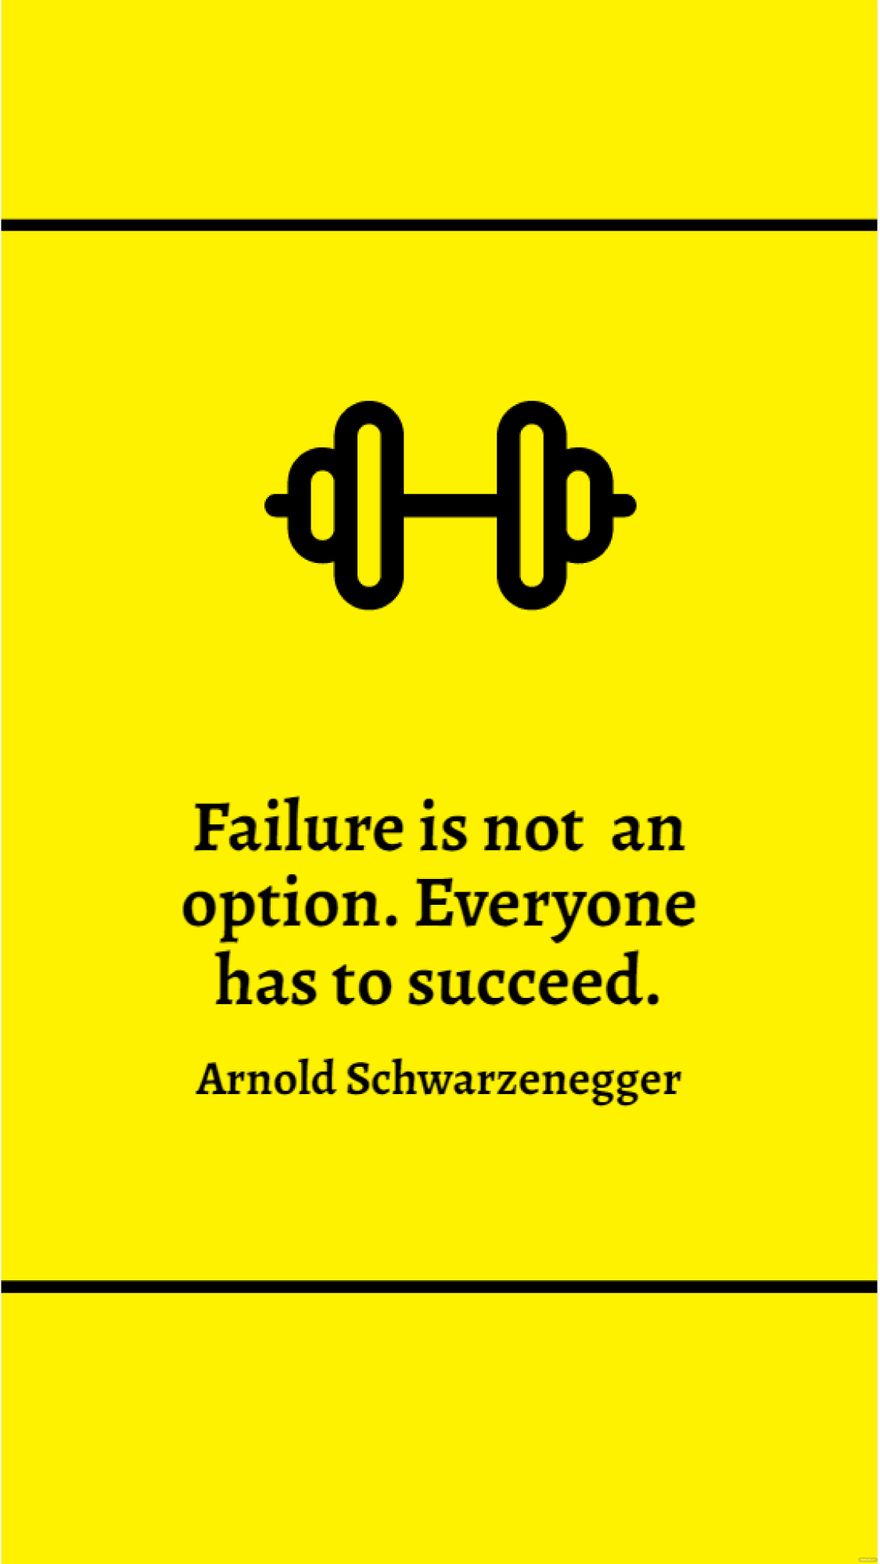 Free Arnold Schwarzenegger - Failure is not an option. Everyone has to succeed. in JPG